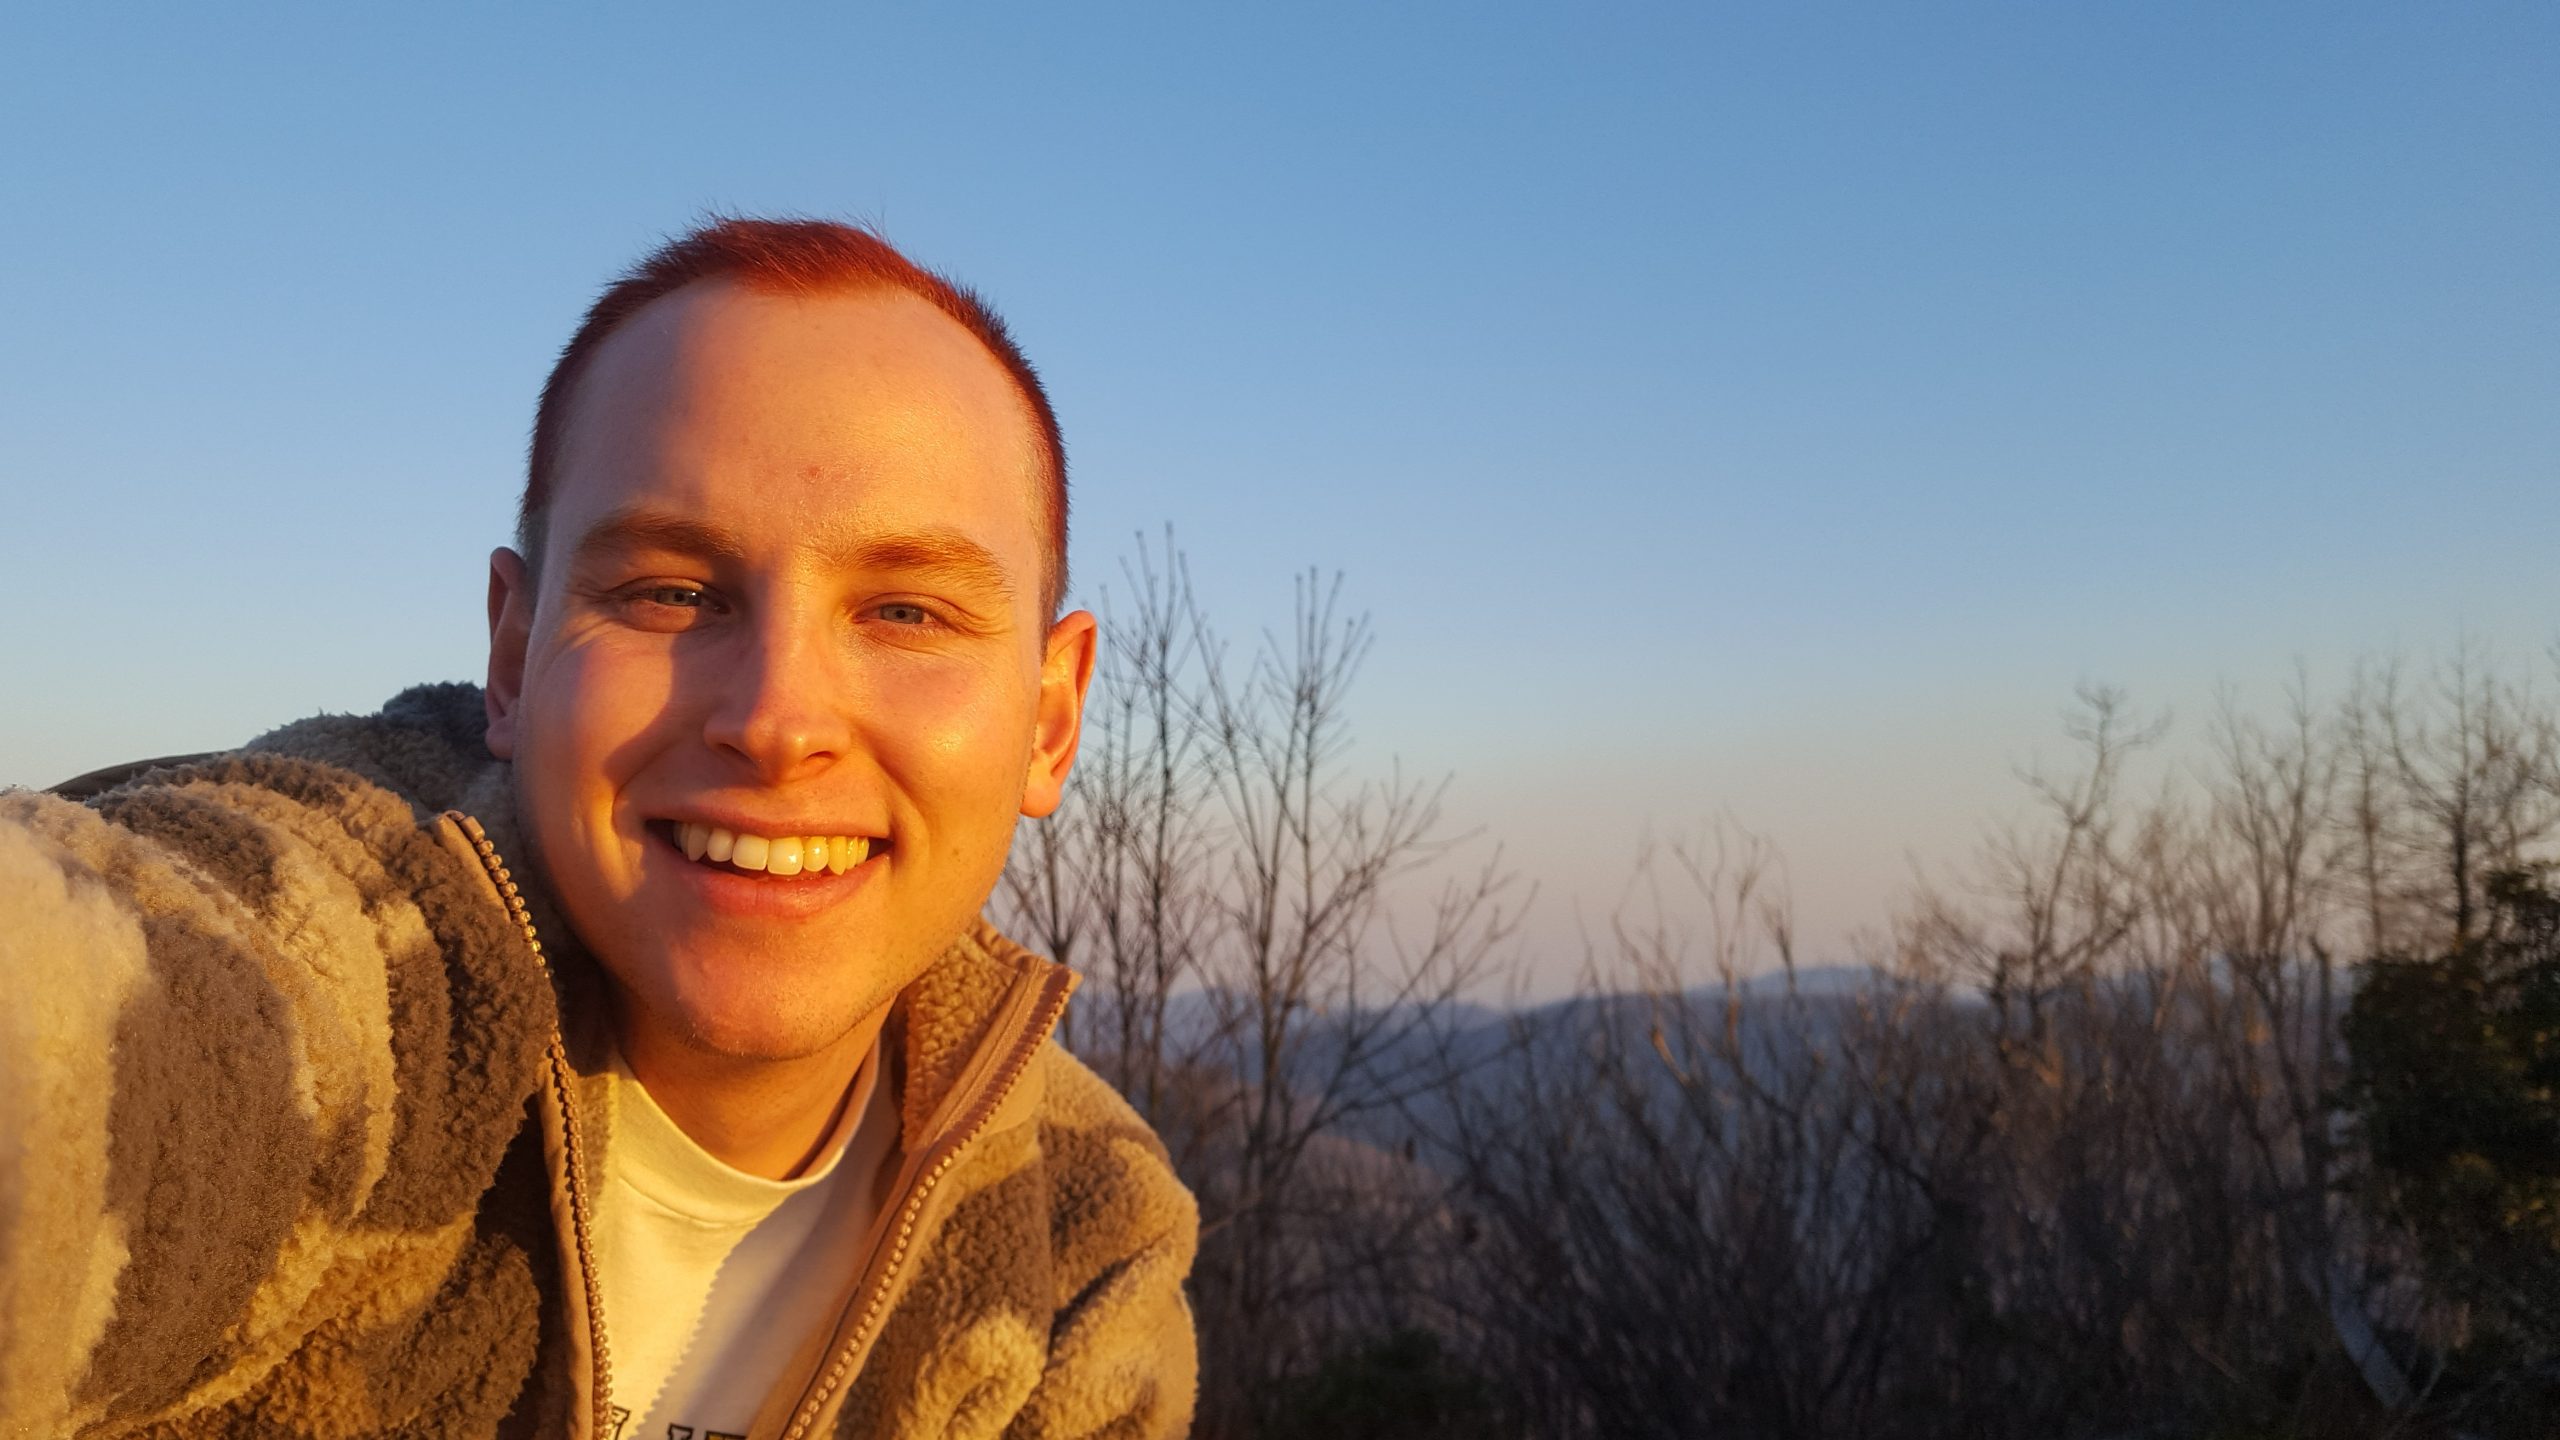 young man smiling with view of mountains behind him